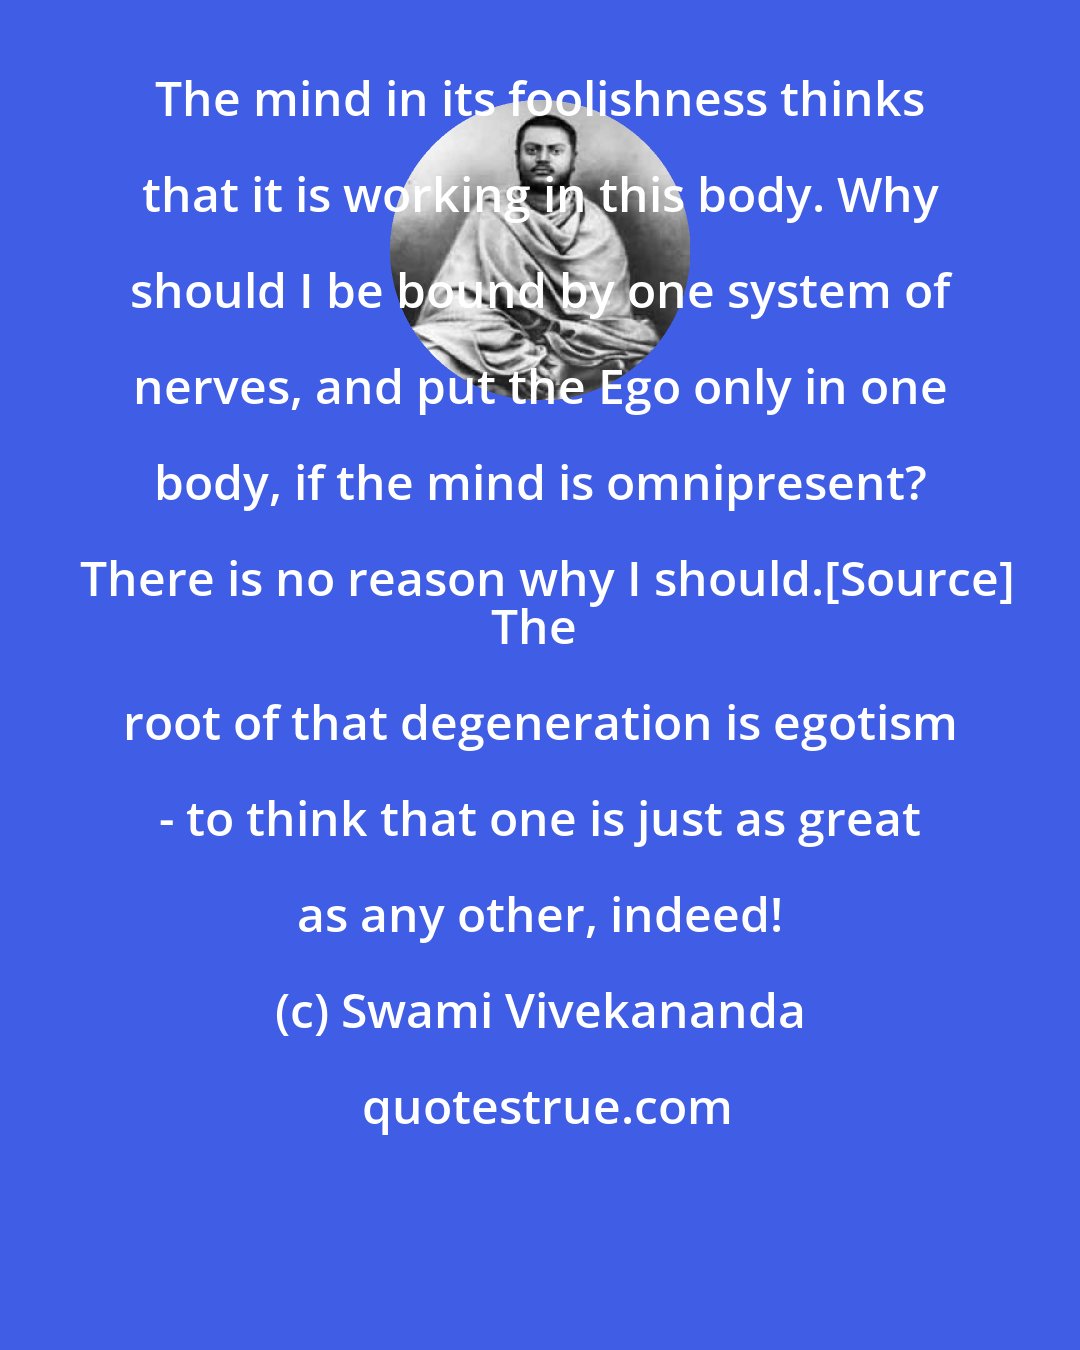 Swami Vivekananda: The mind in its foolishness thinks that it is working in this body. Why should I be bound by one system of nerves, and put the Ego only in one body, if the mind is omnipresent? There is no reason why I should.[Source]
The root of that degeneration is egotism - to think that one is just as great as any other, indeed!